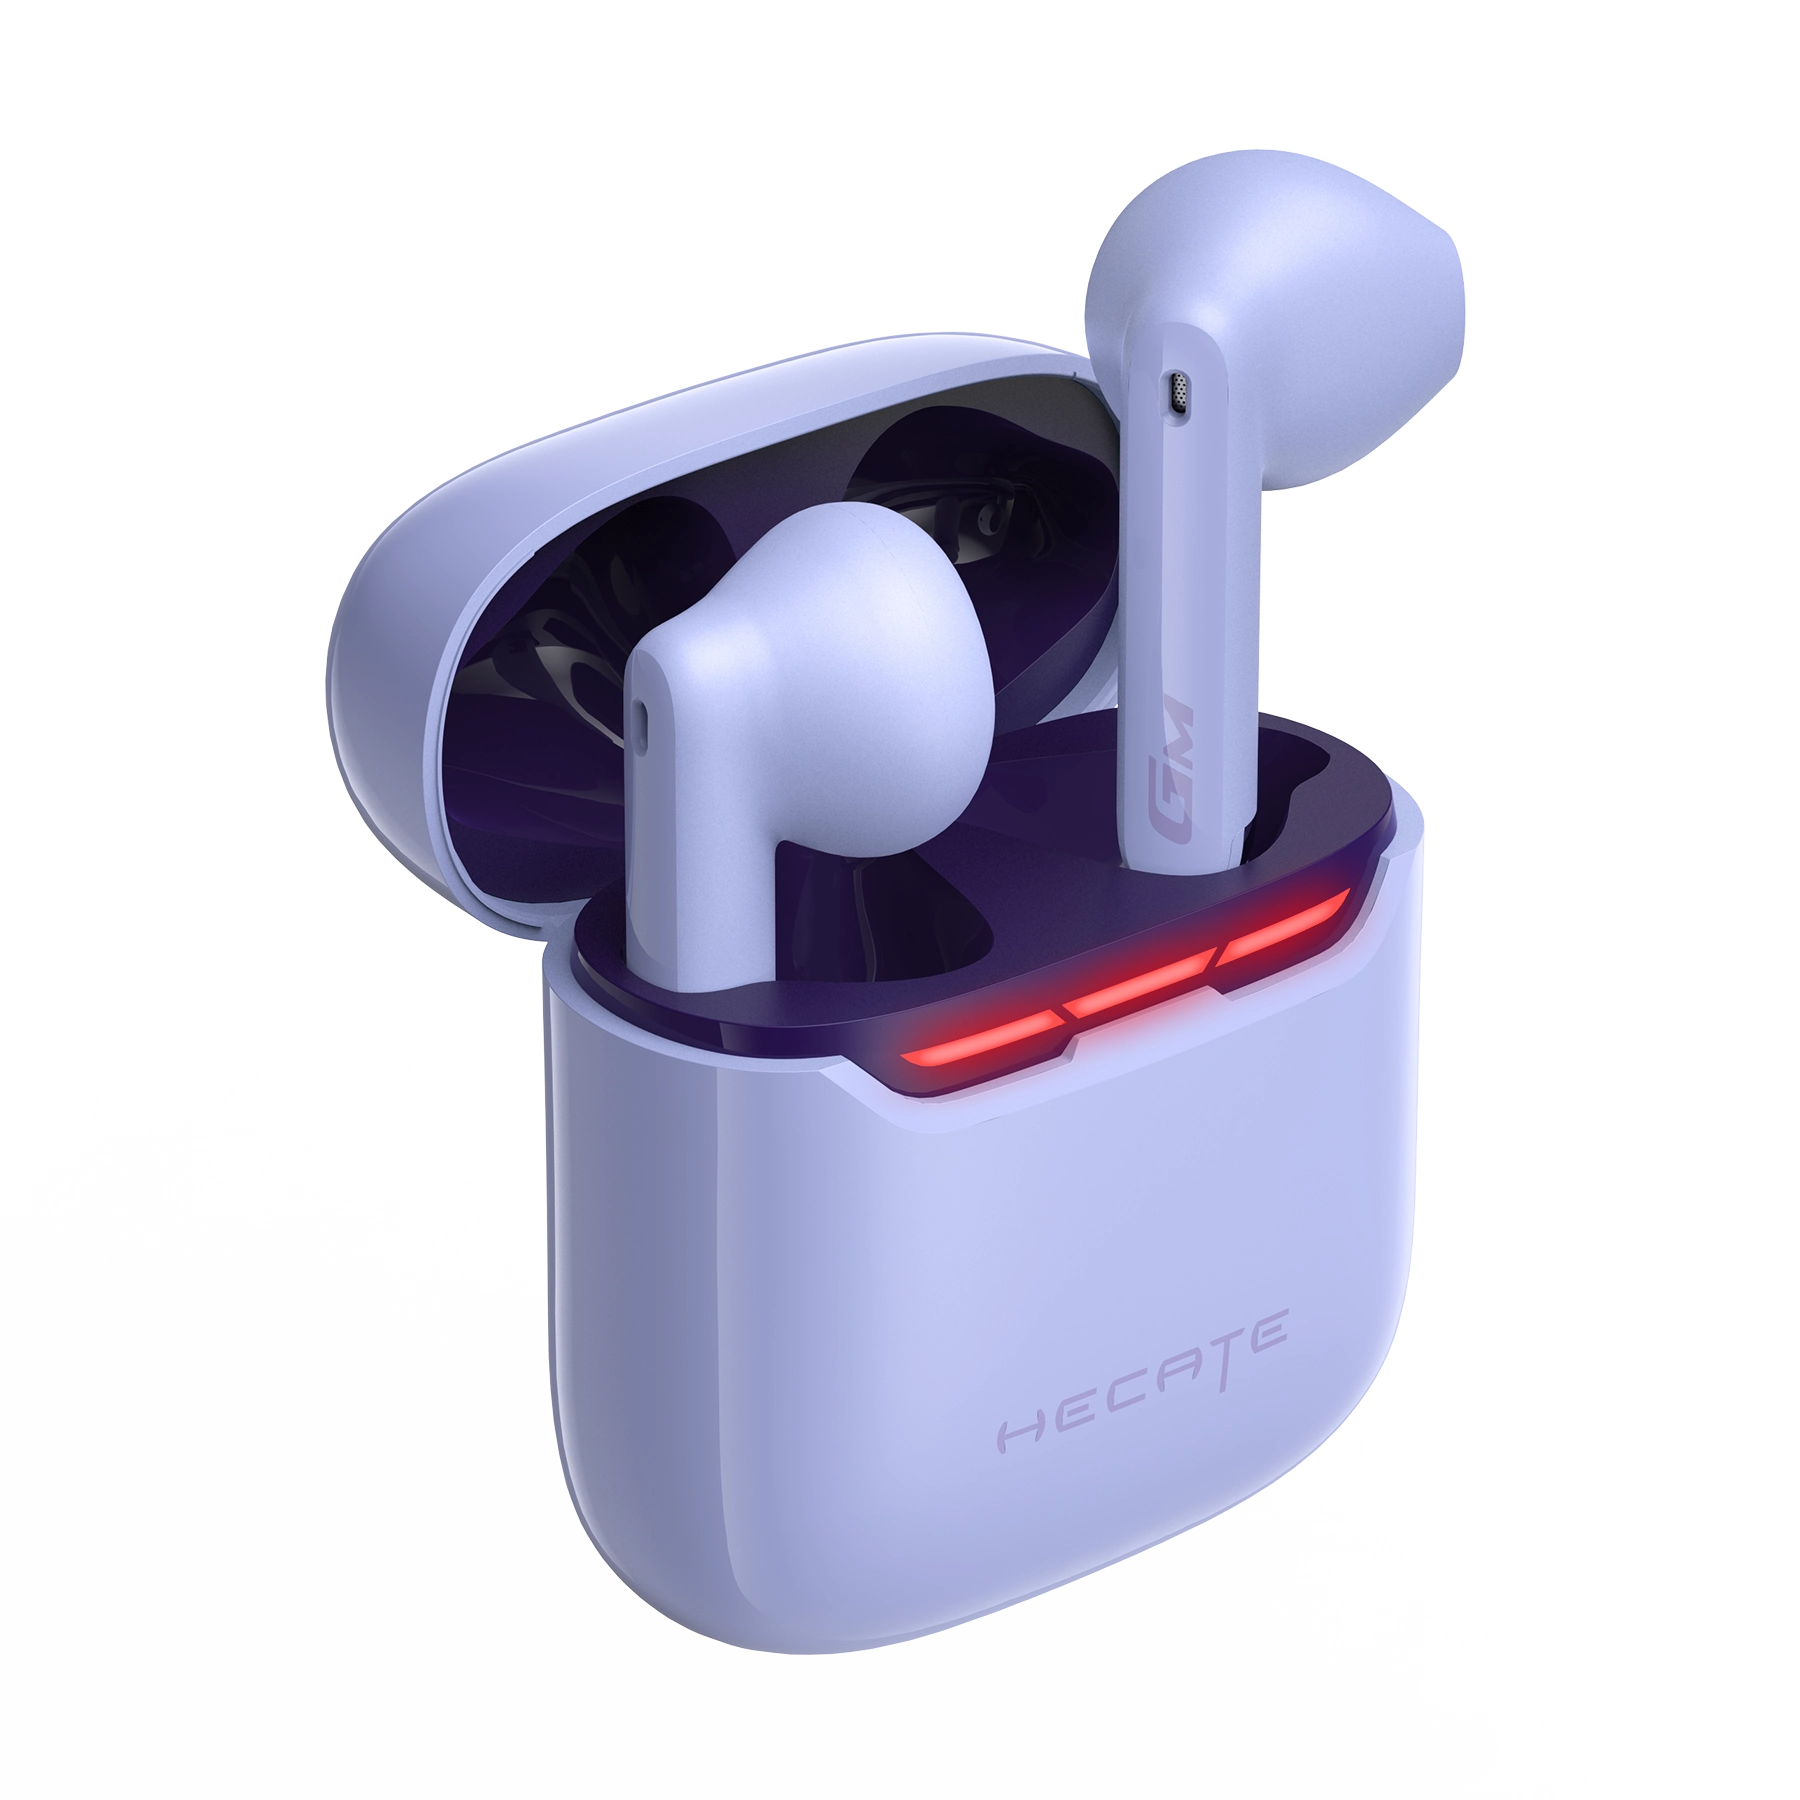 GM3 Plus Wireless Earbuds Product Pictures purplr_4